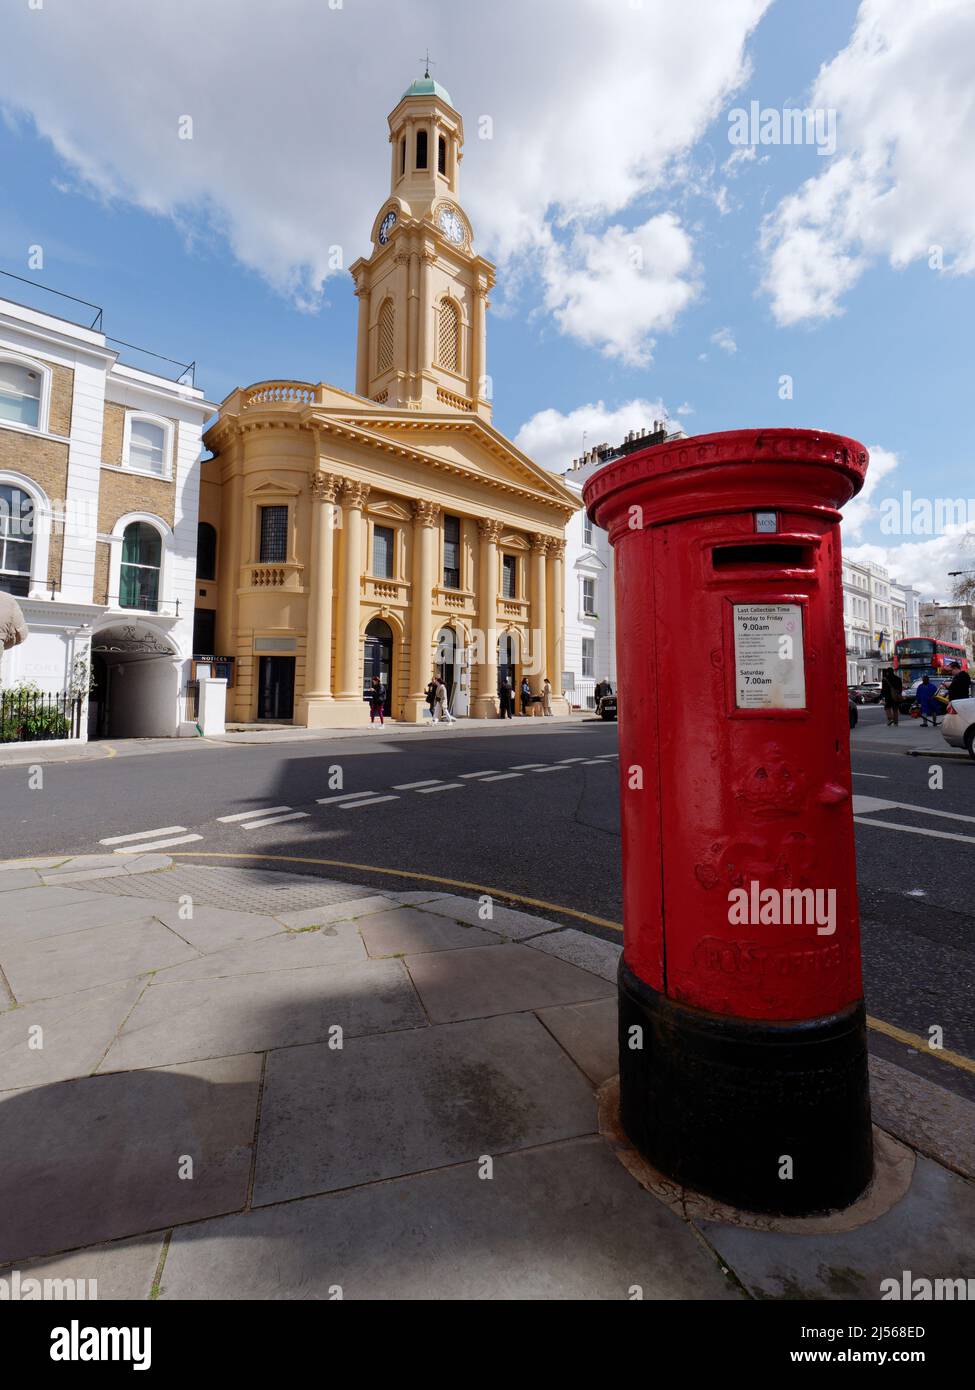 London, Greater London, England, April 09 2022: St Peters Church in Notting Hill with a red post box in the foreground. Stock Photo